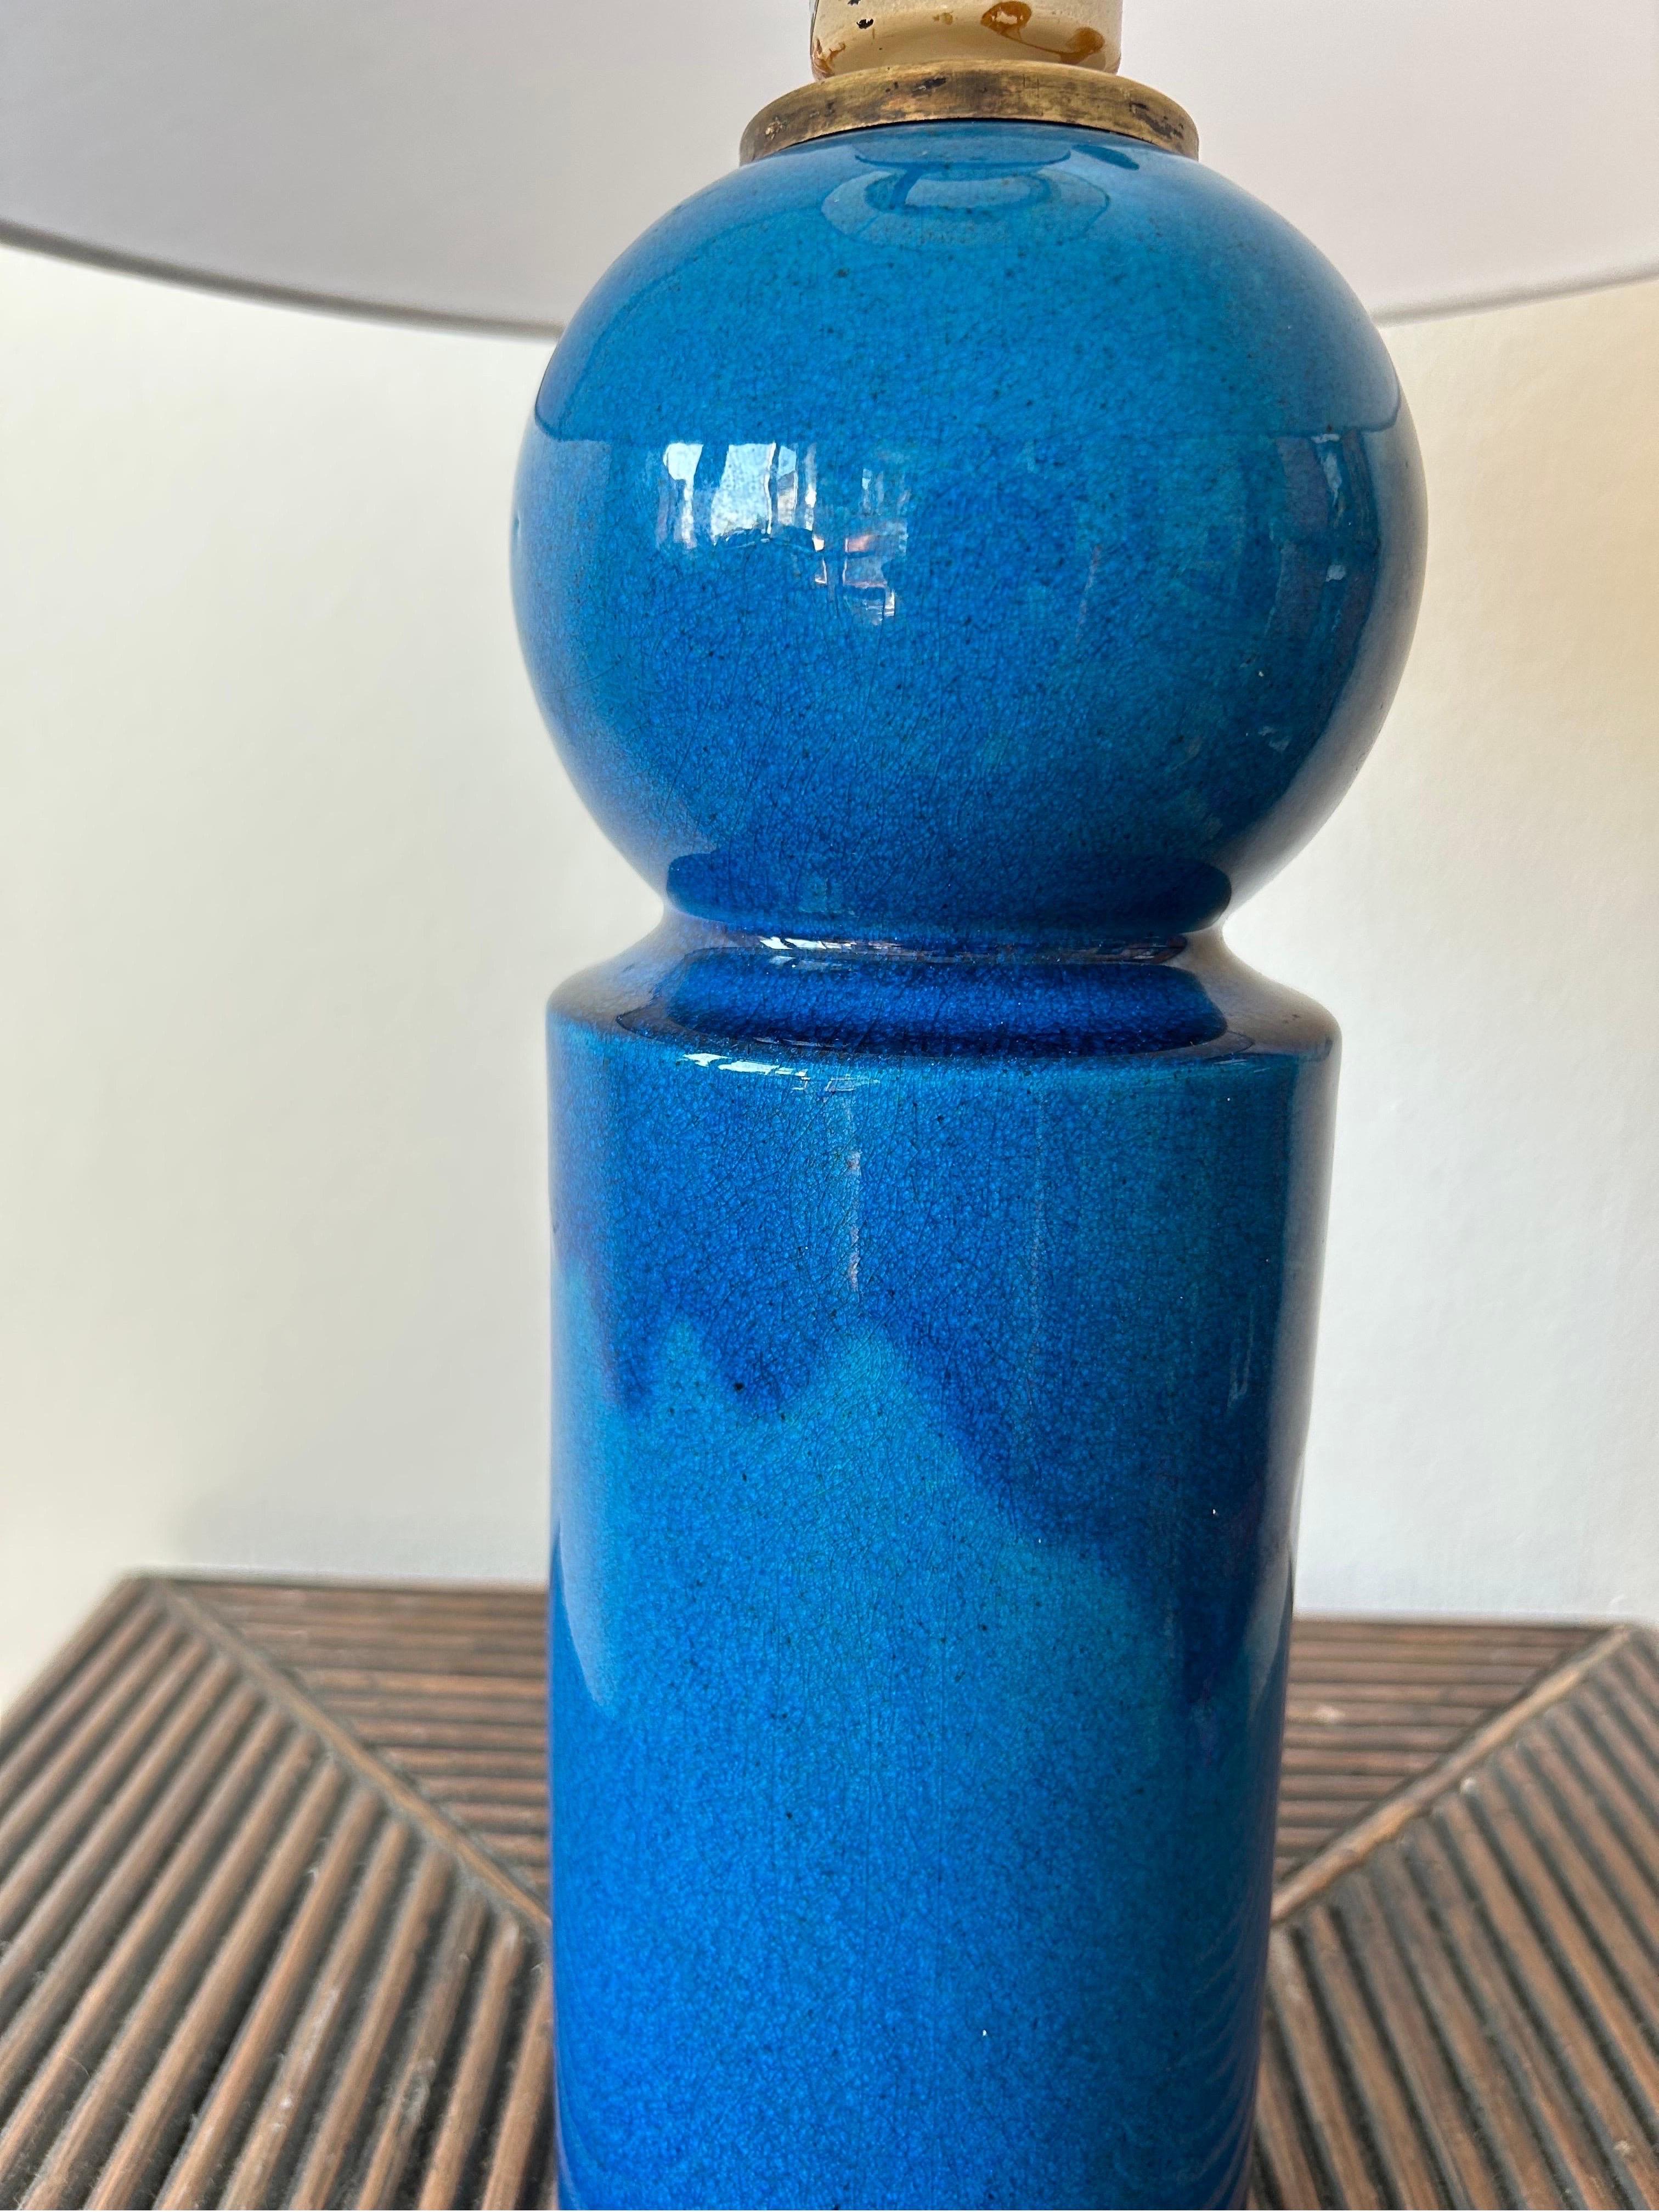 Rare table lamp by danish artist Allan Schmidt made for Kähler in the 1960s.
The lamp has a beautiful blue running glaze which gives a great structure to the lamp.


Kähler Keramik is a Danish ceramic company, originally from Næstved.
Kähler's